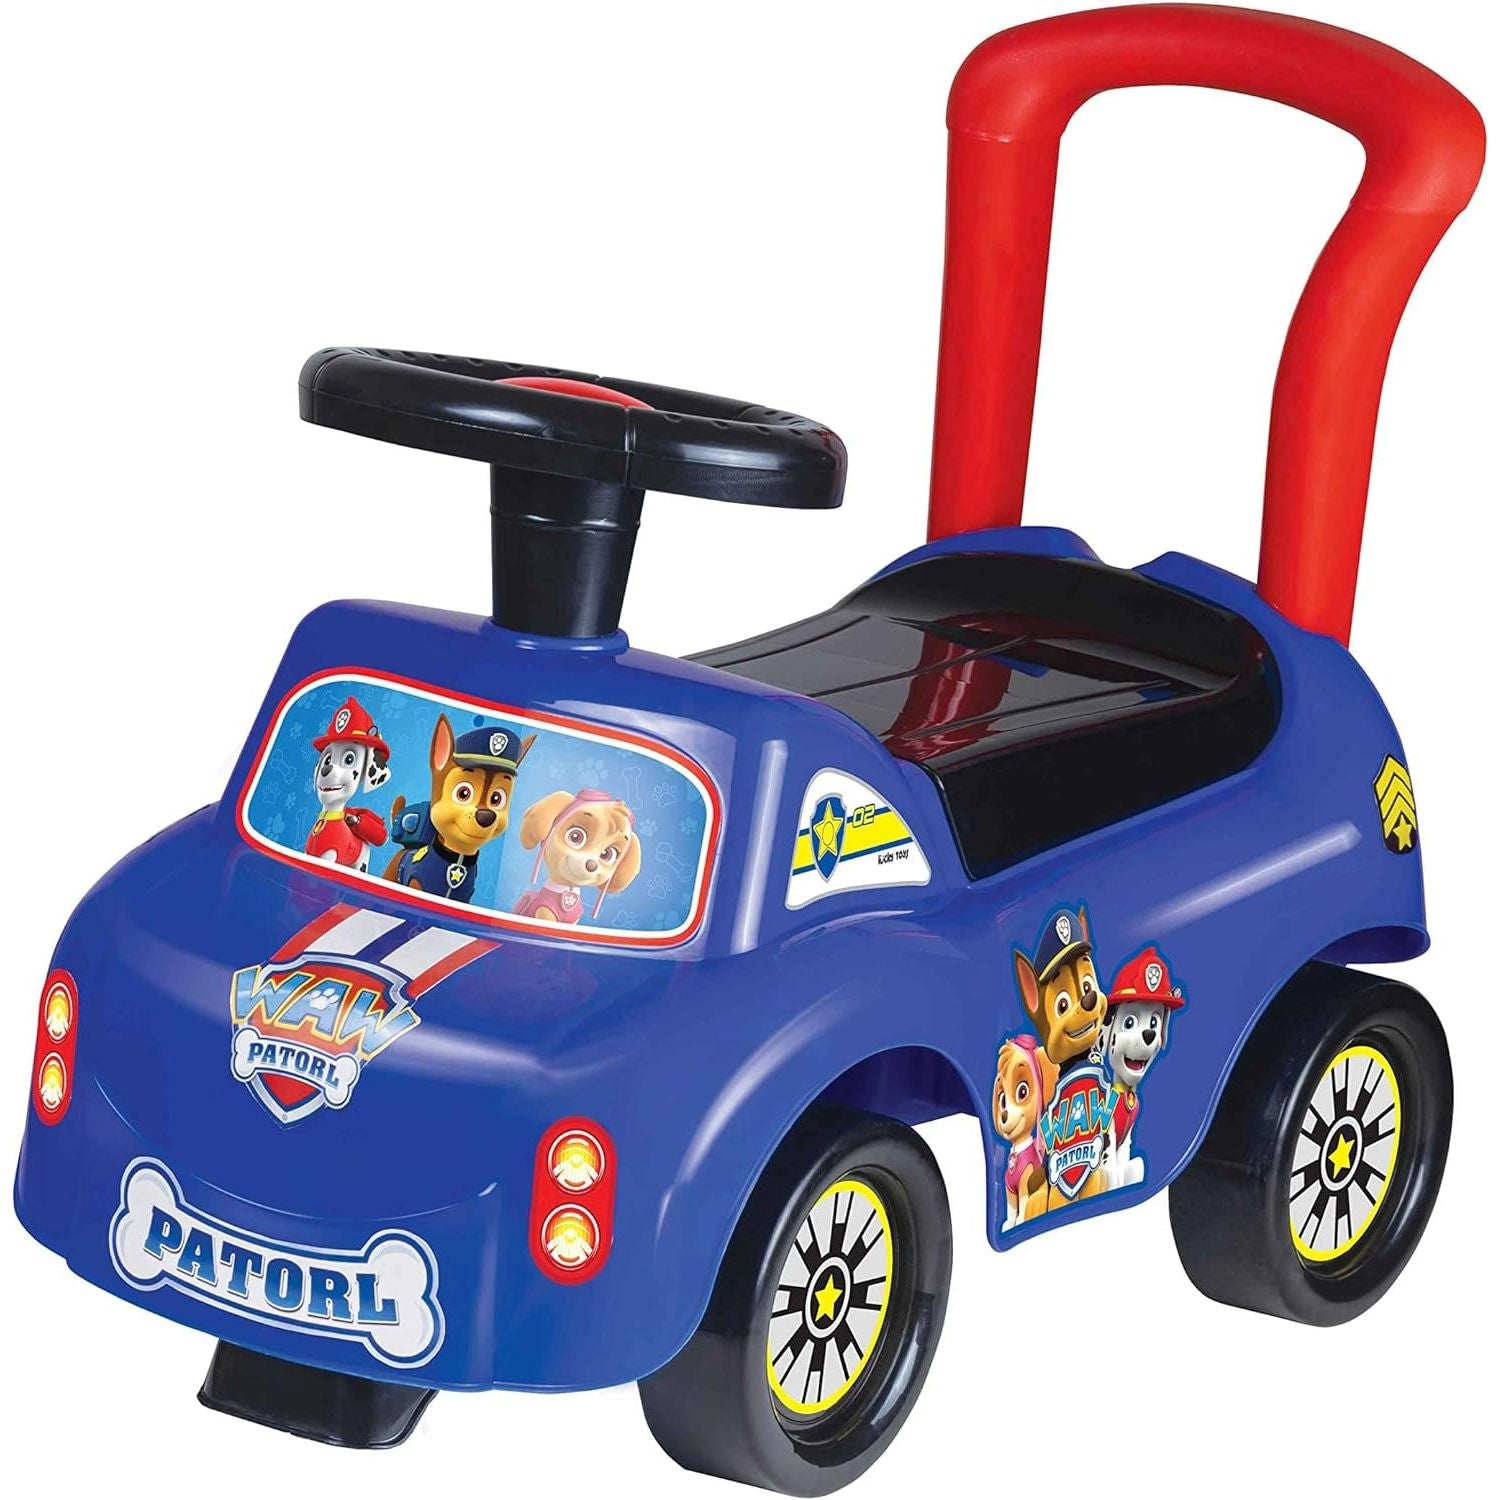 Tic Toys Plastic Push Car Game With Storage Box And Button For Kids - Paw Patrol